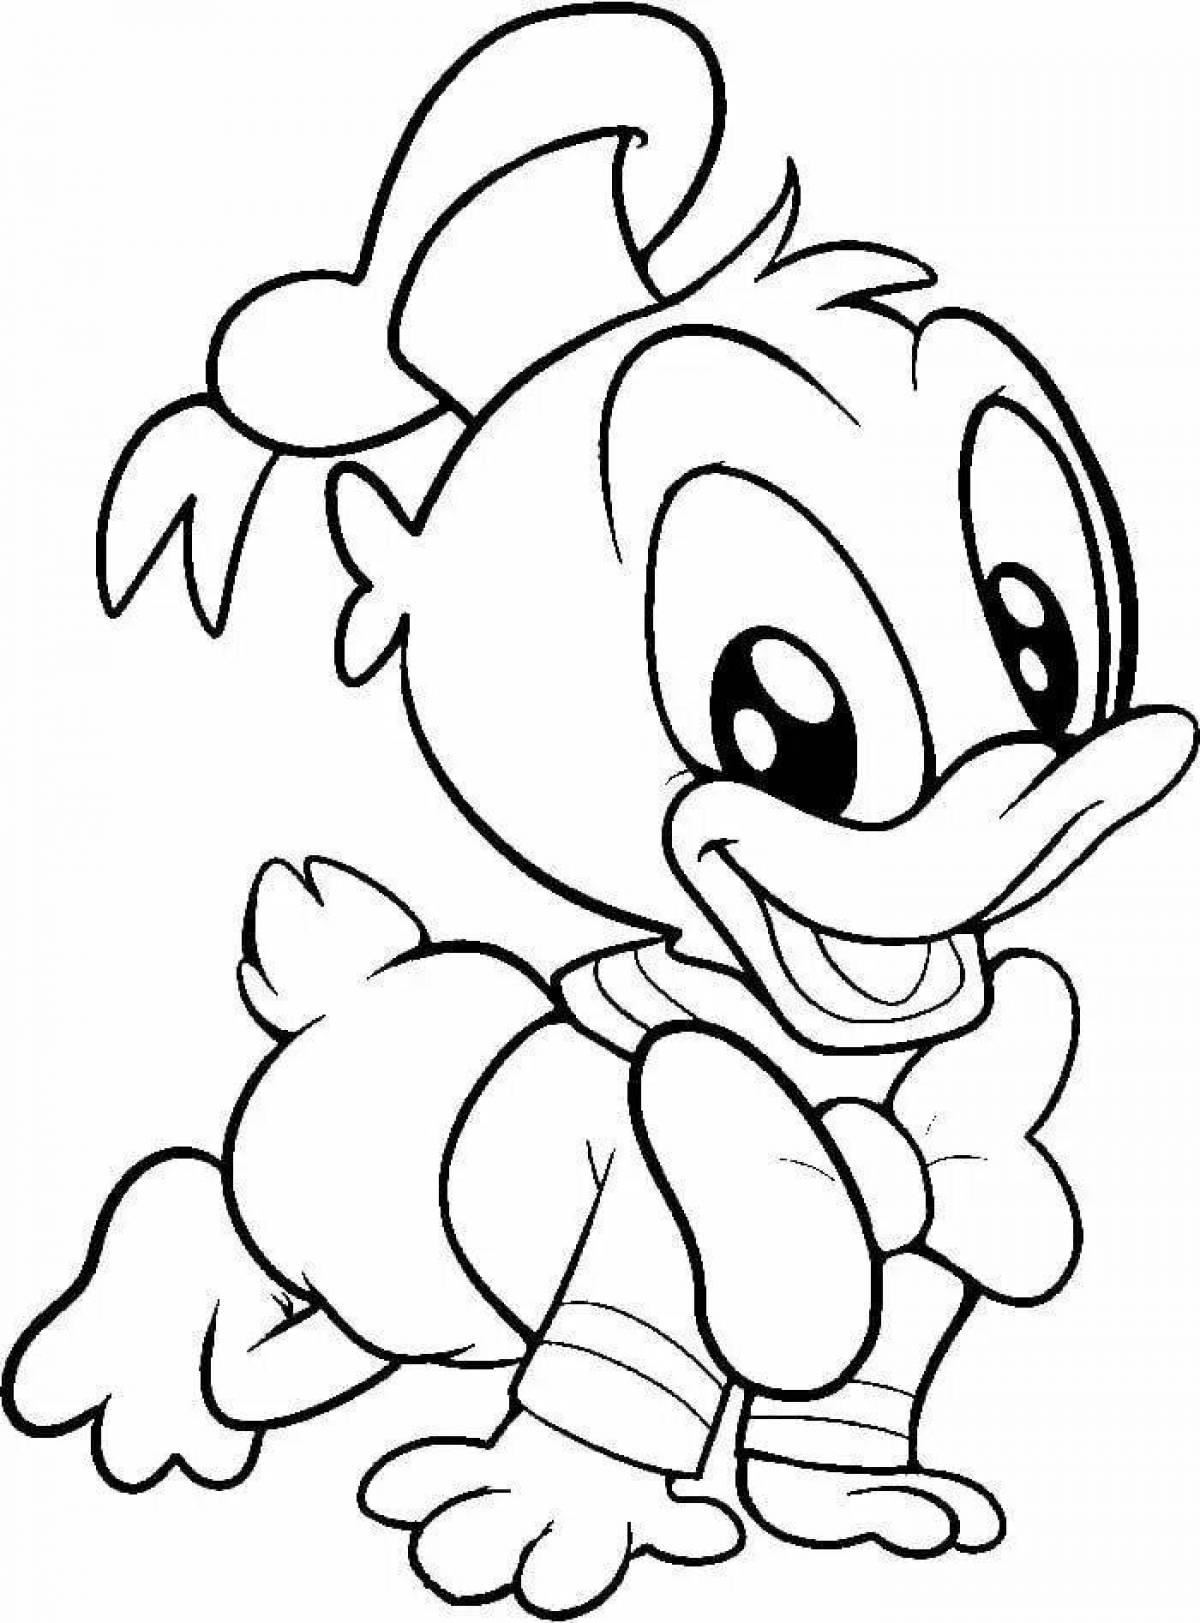 Tempting cartoon character coloring page